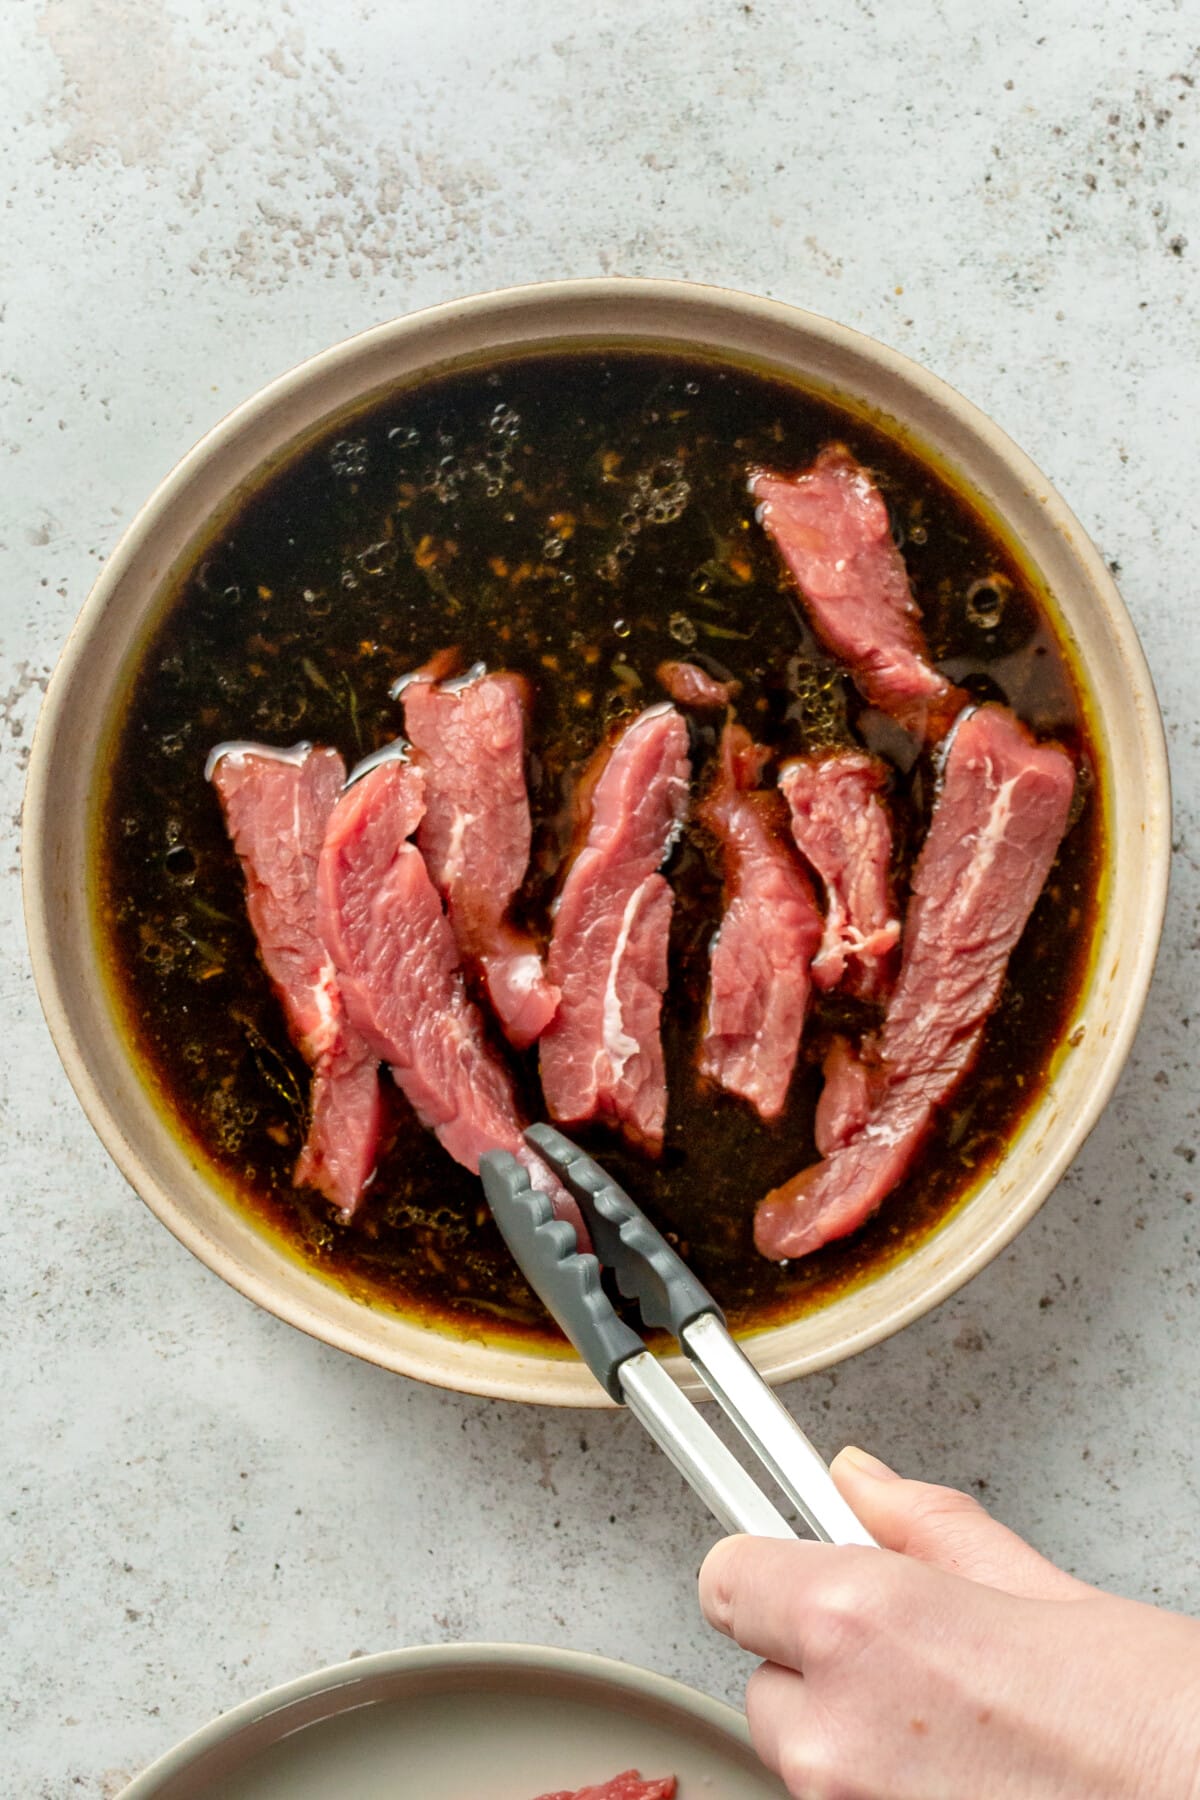 Beef strips are placed into a marinade in a shallow ceramic bowl on a light grey surface.